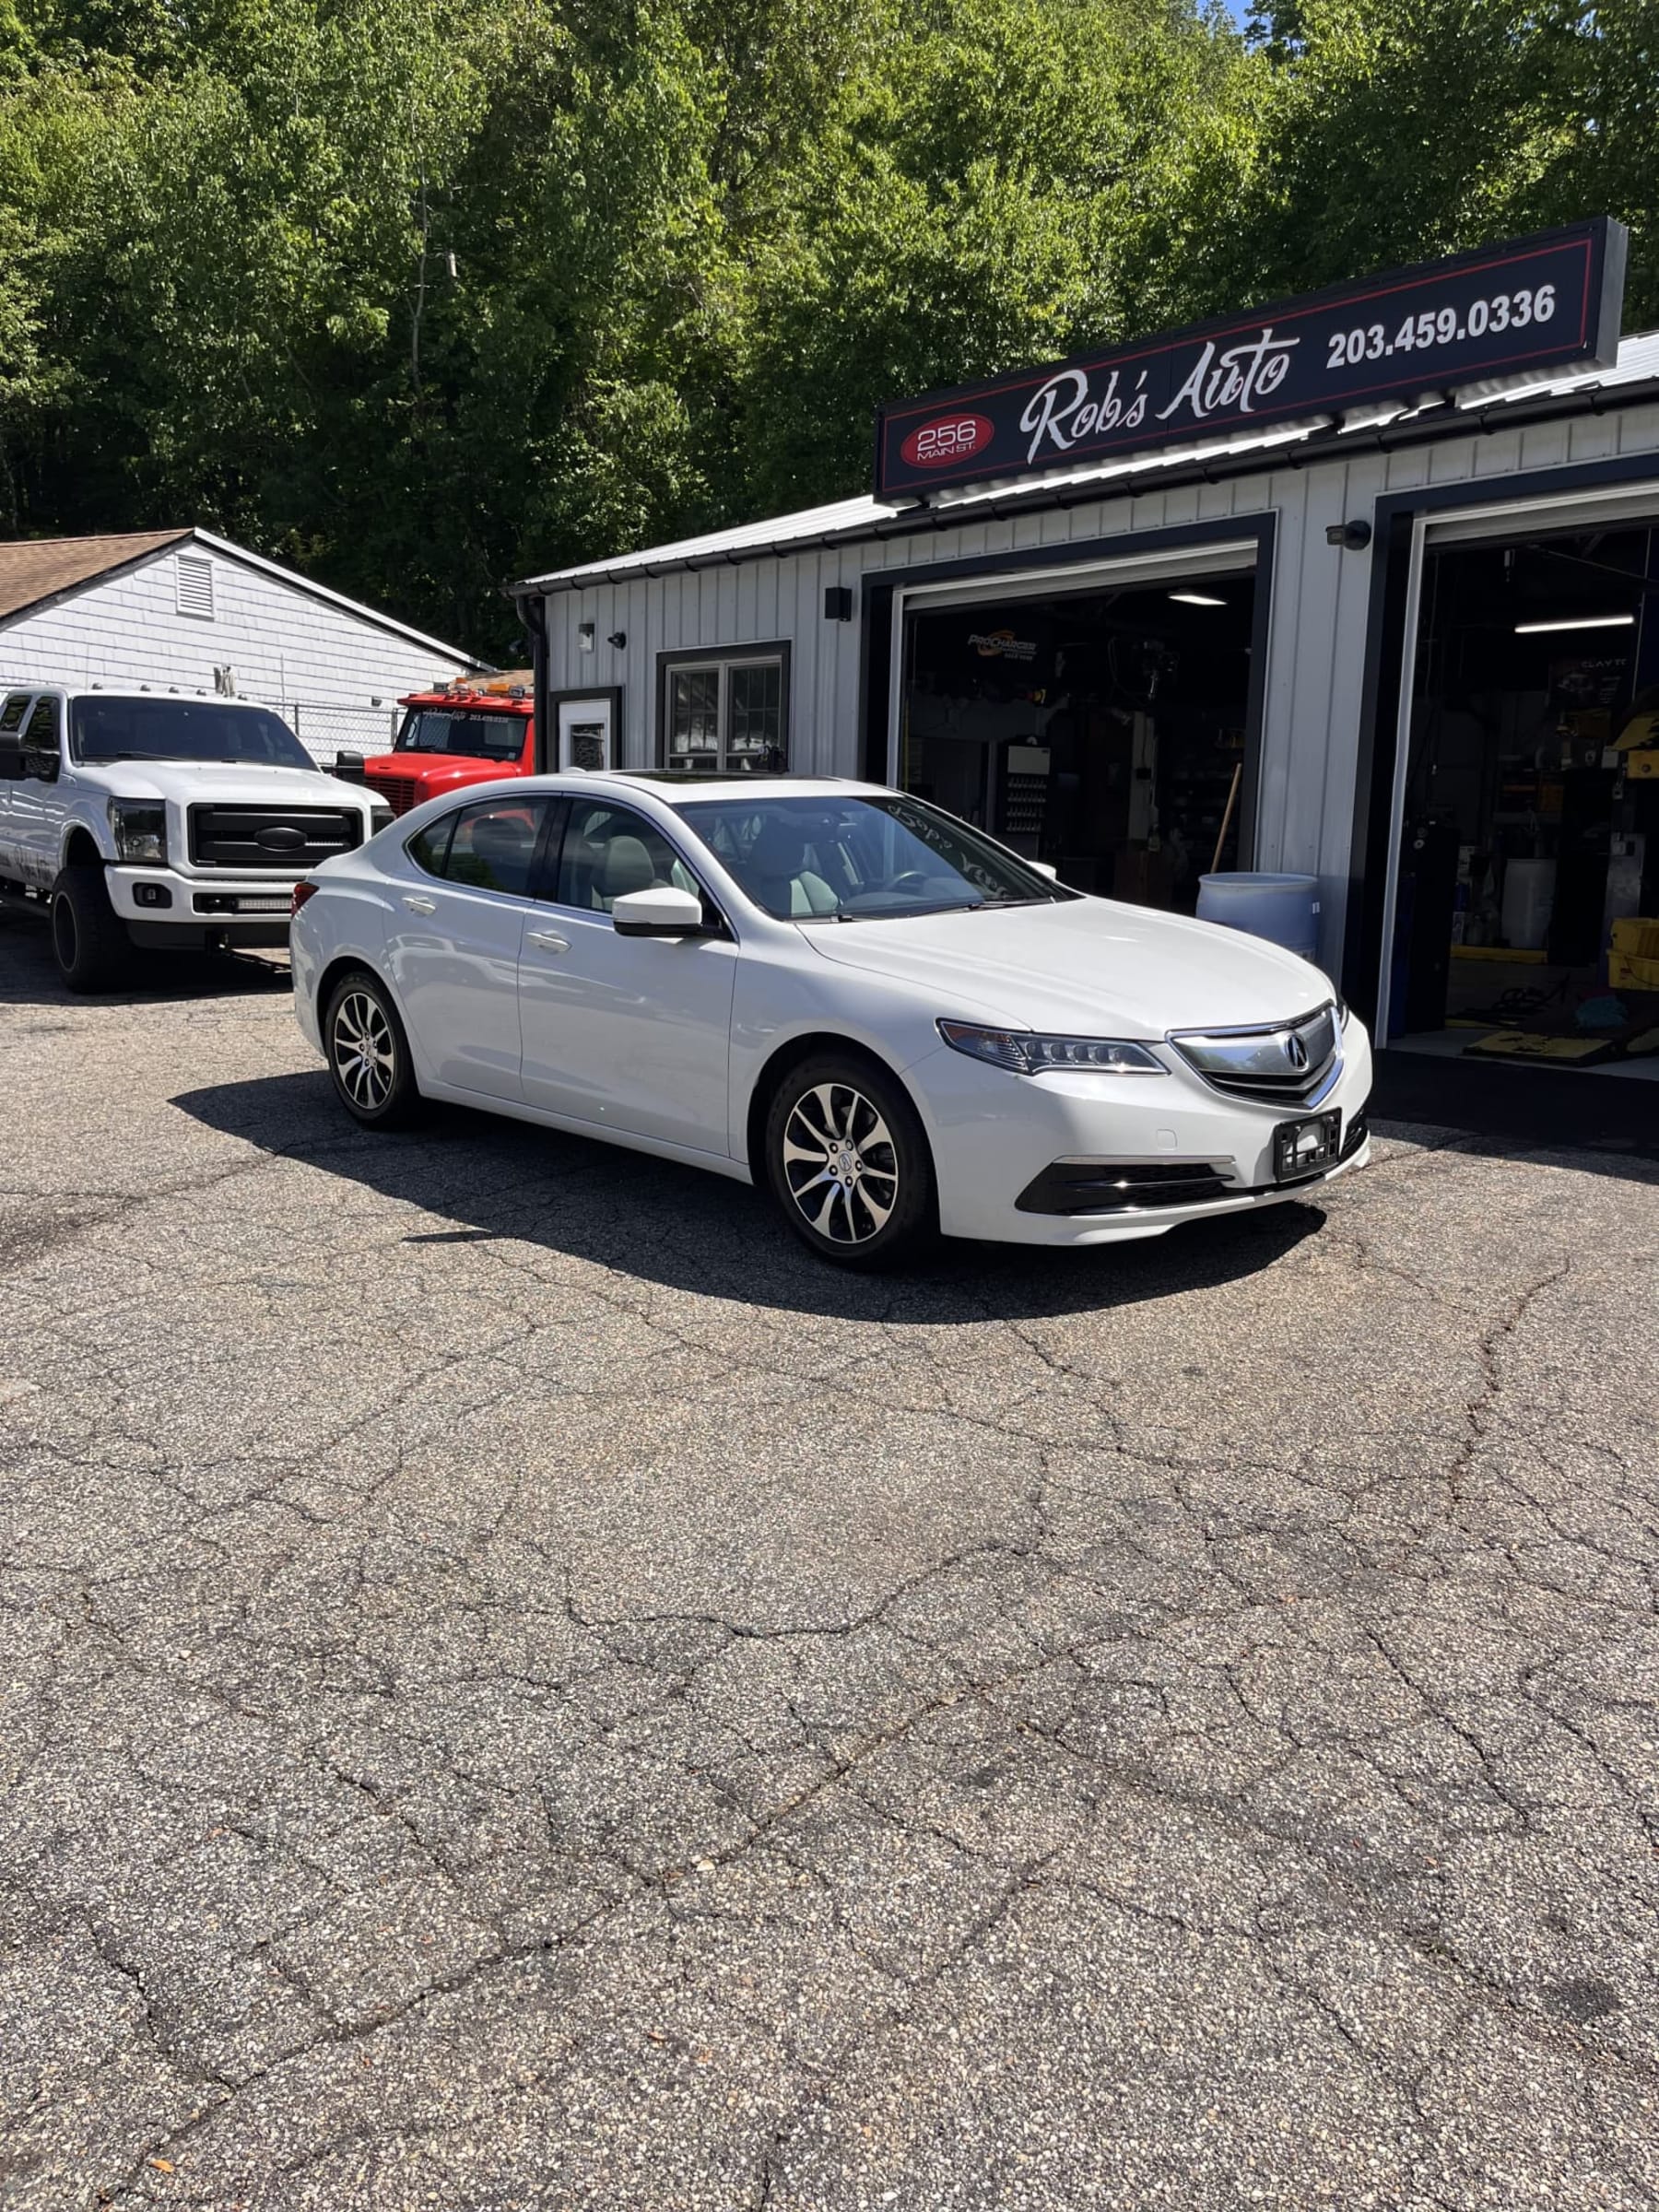 NEW ARRIVAL!! Another diamond in the rough!! One owner elderly owned 2015 Acura TLX!! ONLY 26,000 miles!! Leather, moonroof, Bluetooth, backup camera and much much more!! Definitely won’t last at only $18,900!!